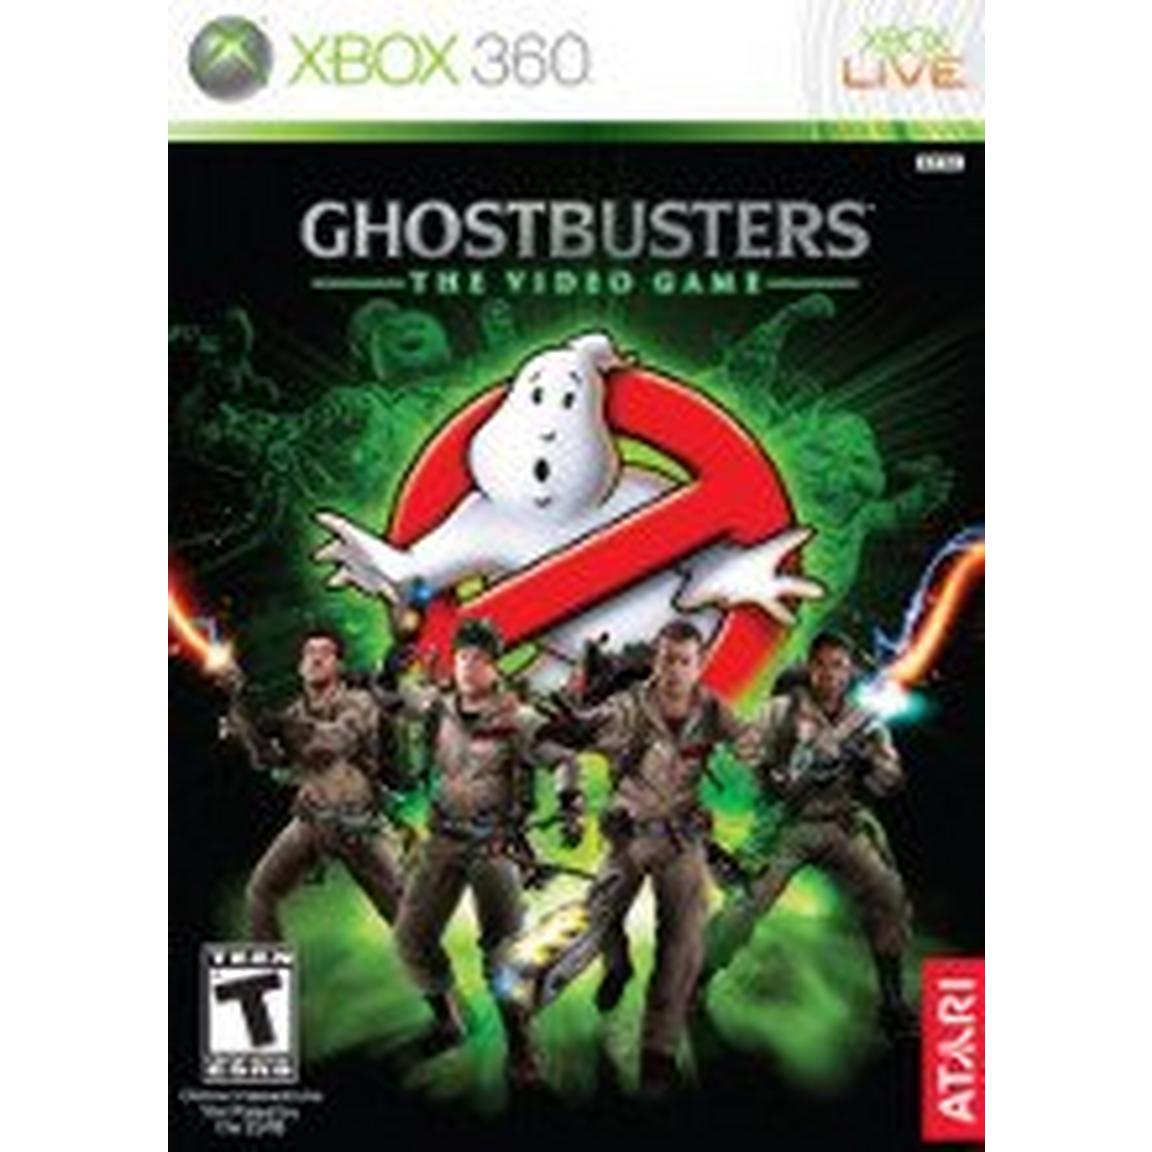 Ghostbusters - Xbox 360, Pre-Owned -  Atari